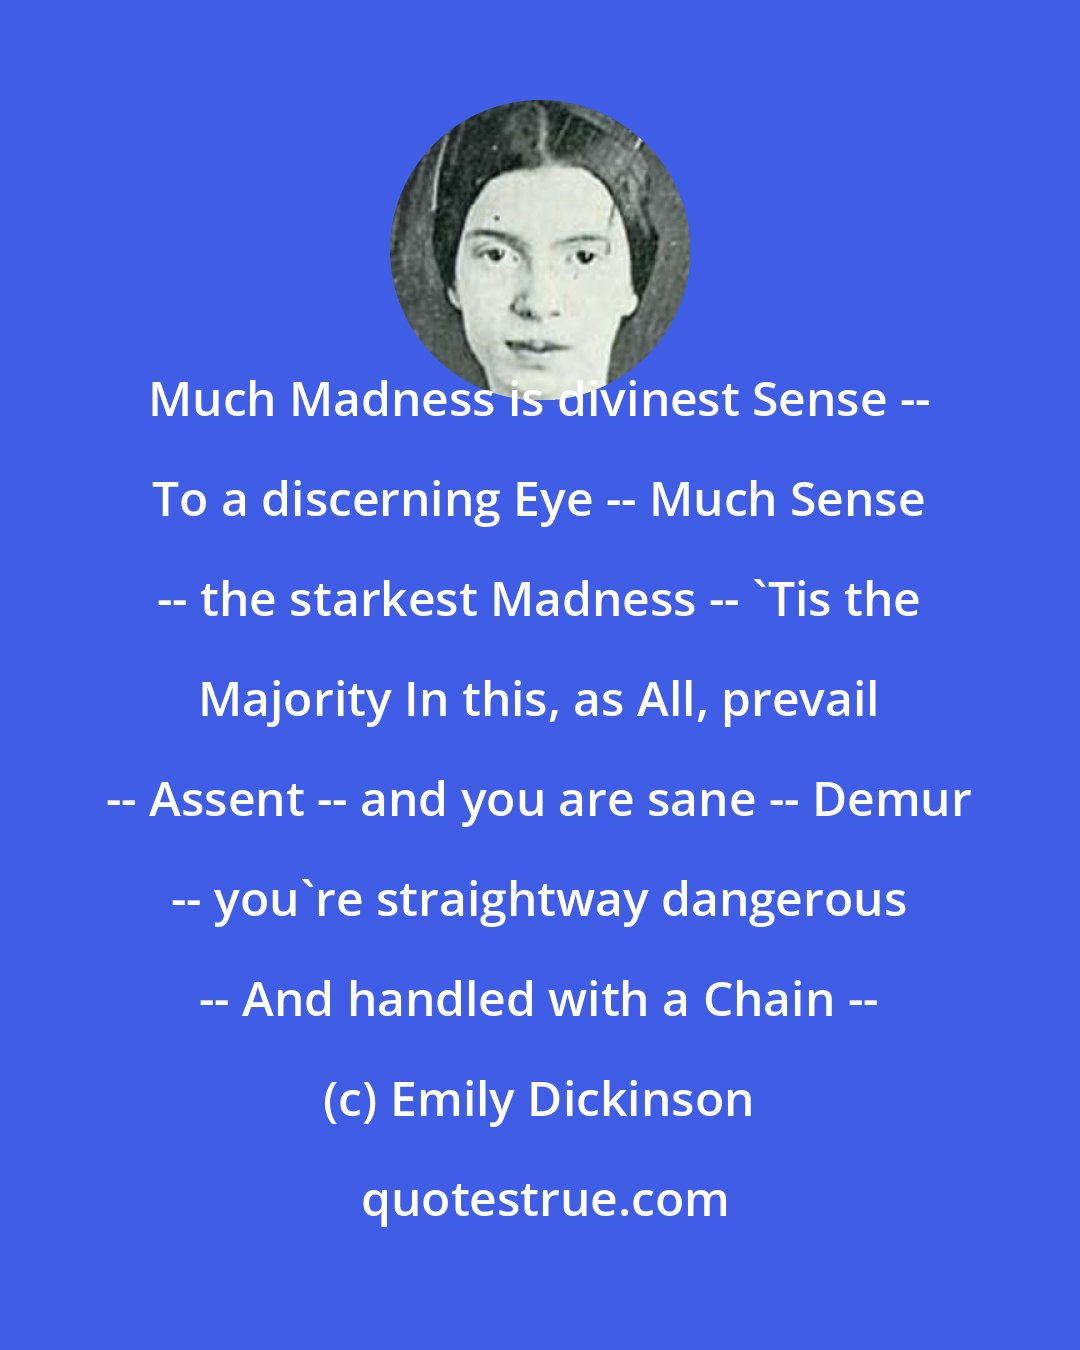 Emily Dickinson: Much Madness is divinest Sense -- To a discerning Eye -- Much Sense -- the starkest Madness -- 'Tis the Majority In this, as All, prevail -- Assent -- and you are sane -- Demur -- you're straightway dangerous -- And handled with a Chain --